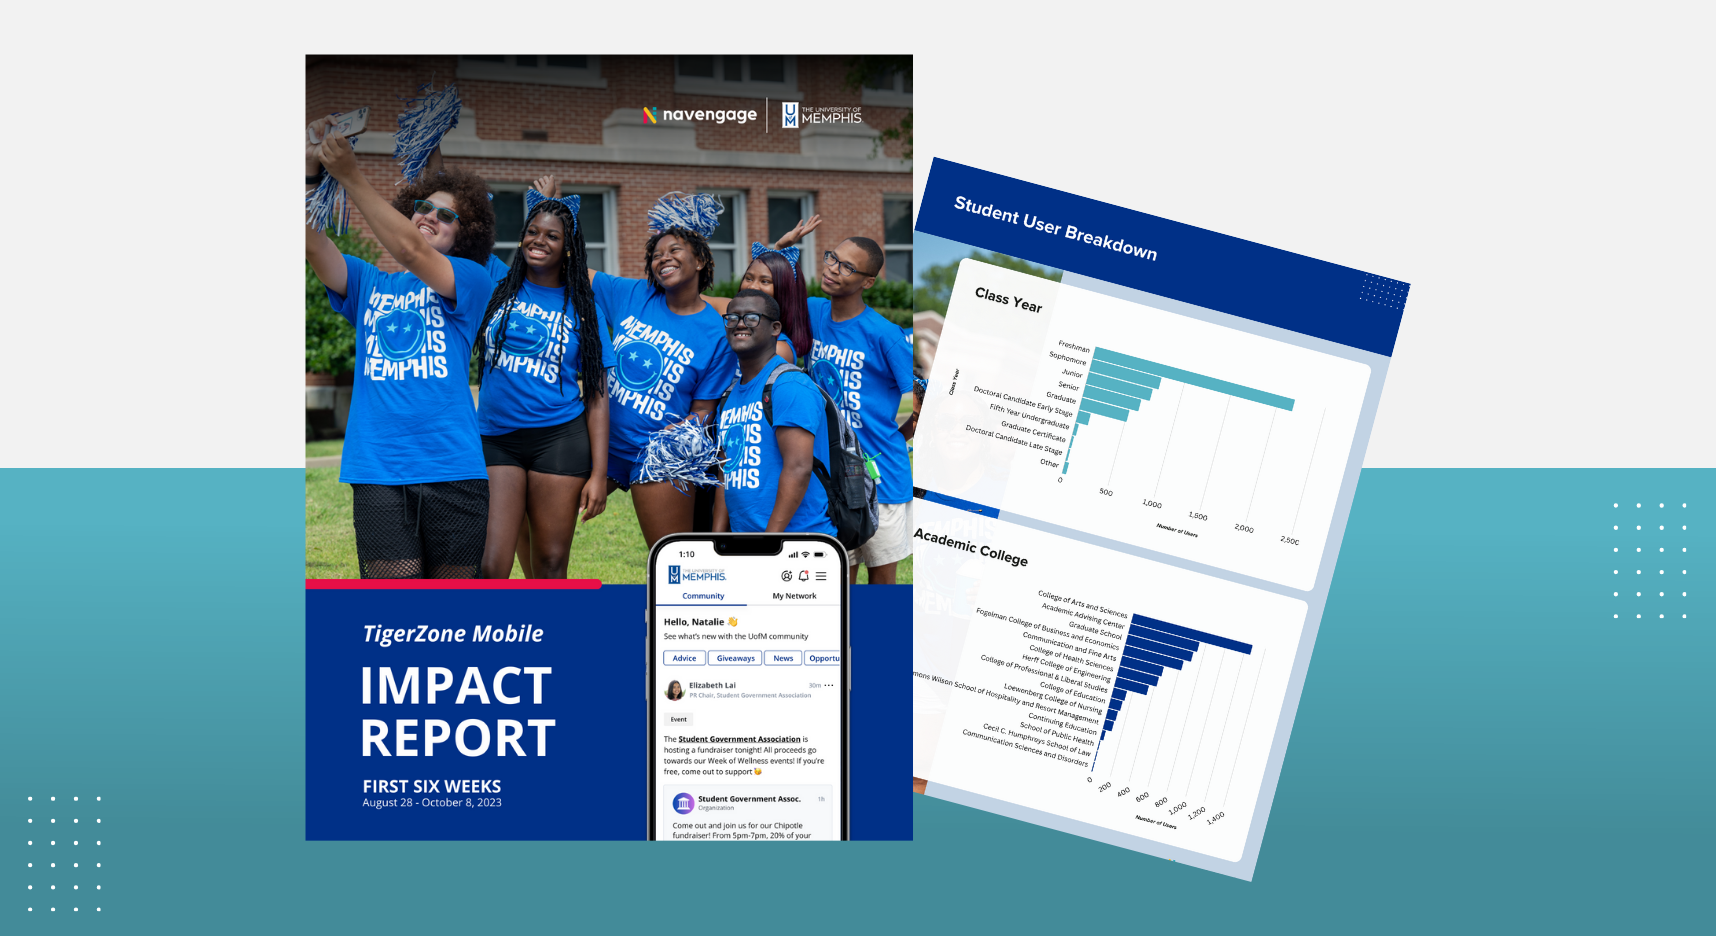 TigerZone Mobile's First 6 Weeks: Shaping University of Memphis Life